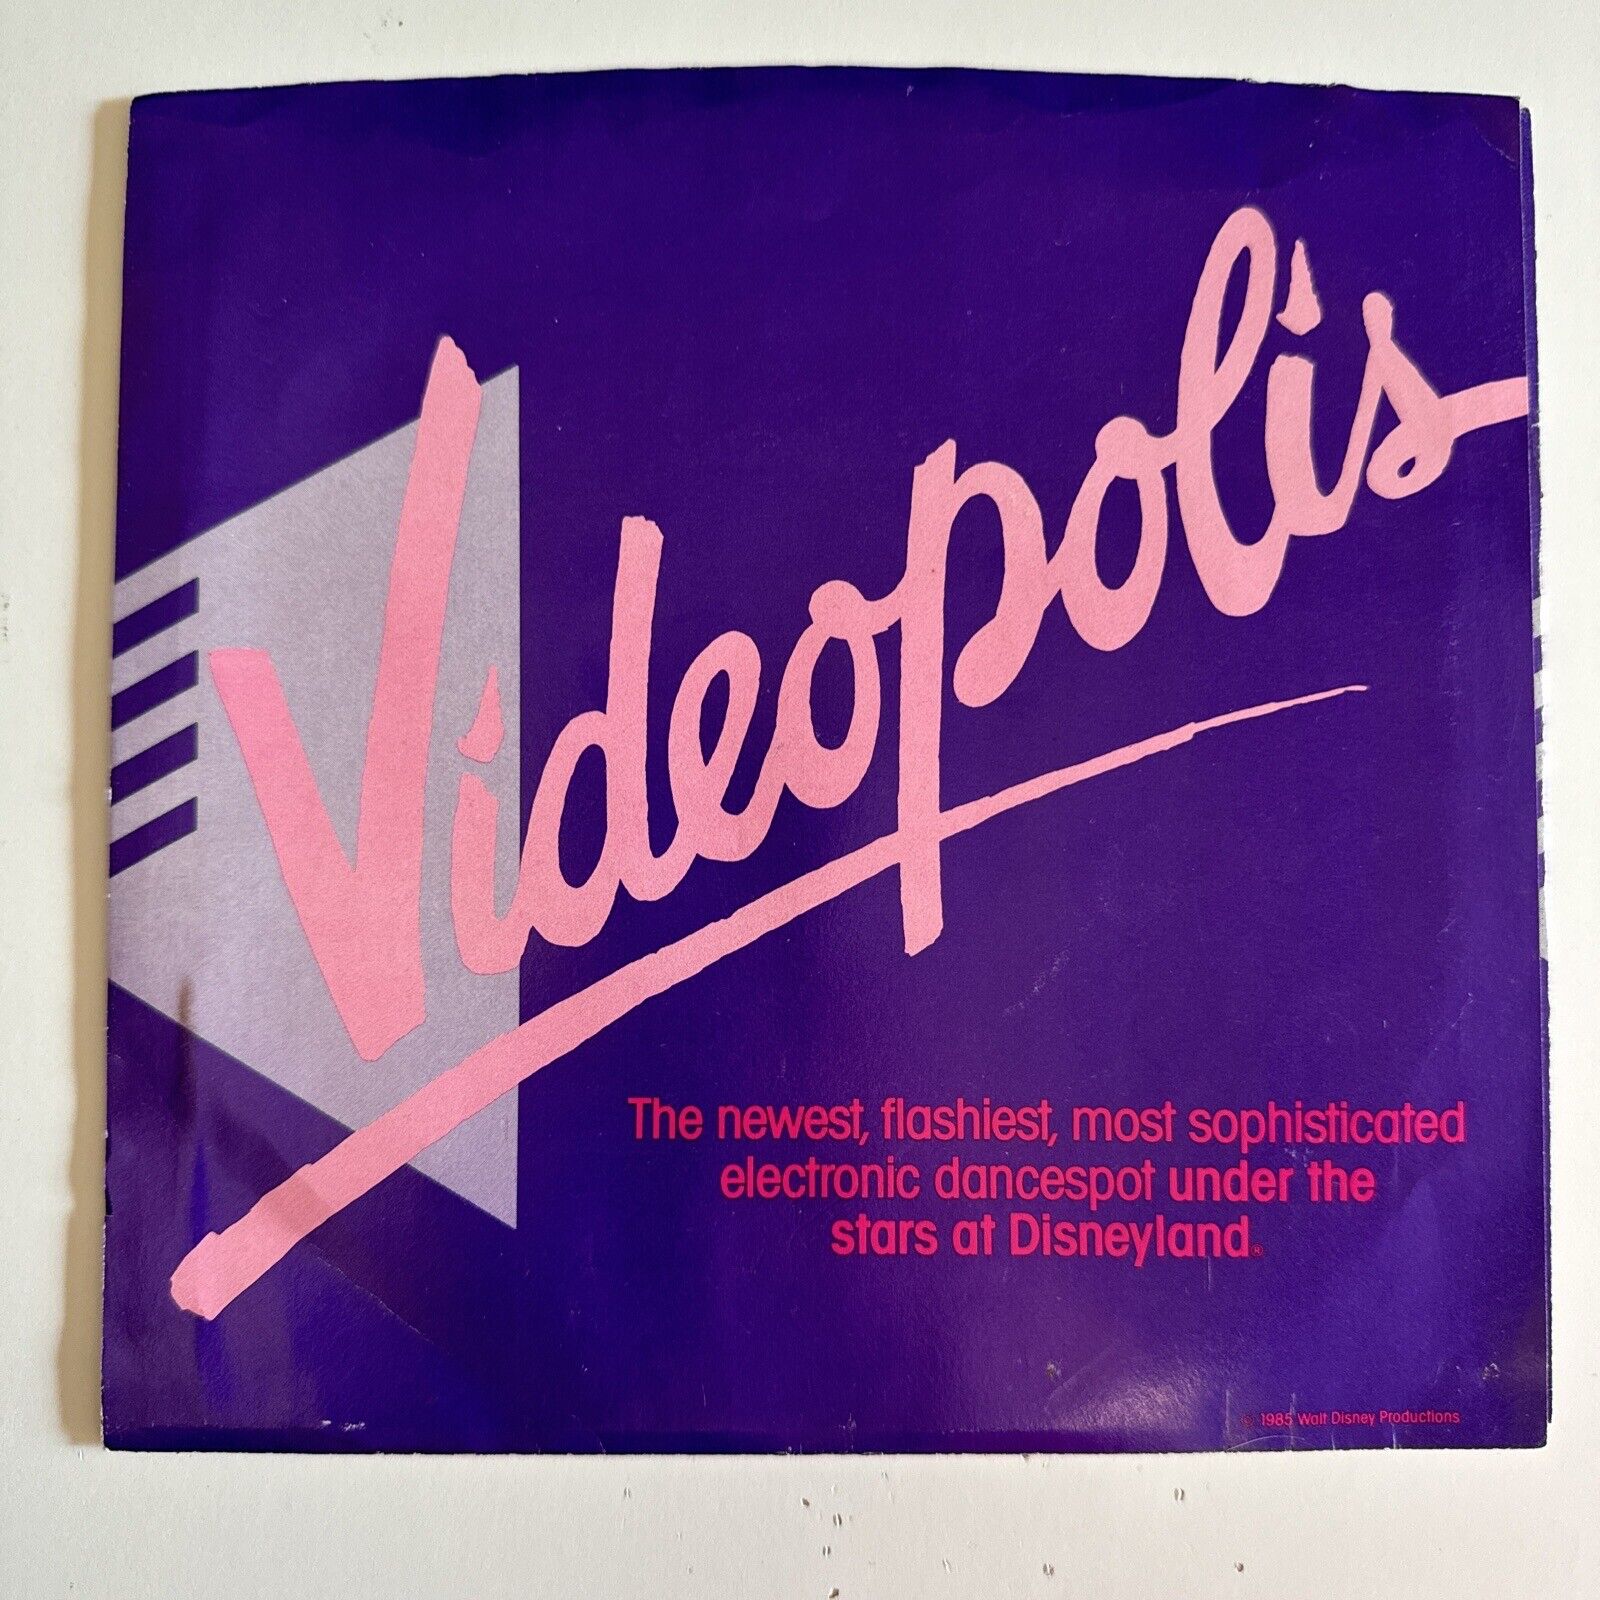 videopolis 7” rare walt disney productions from 1985 in near mint condition